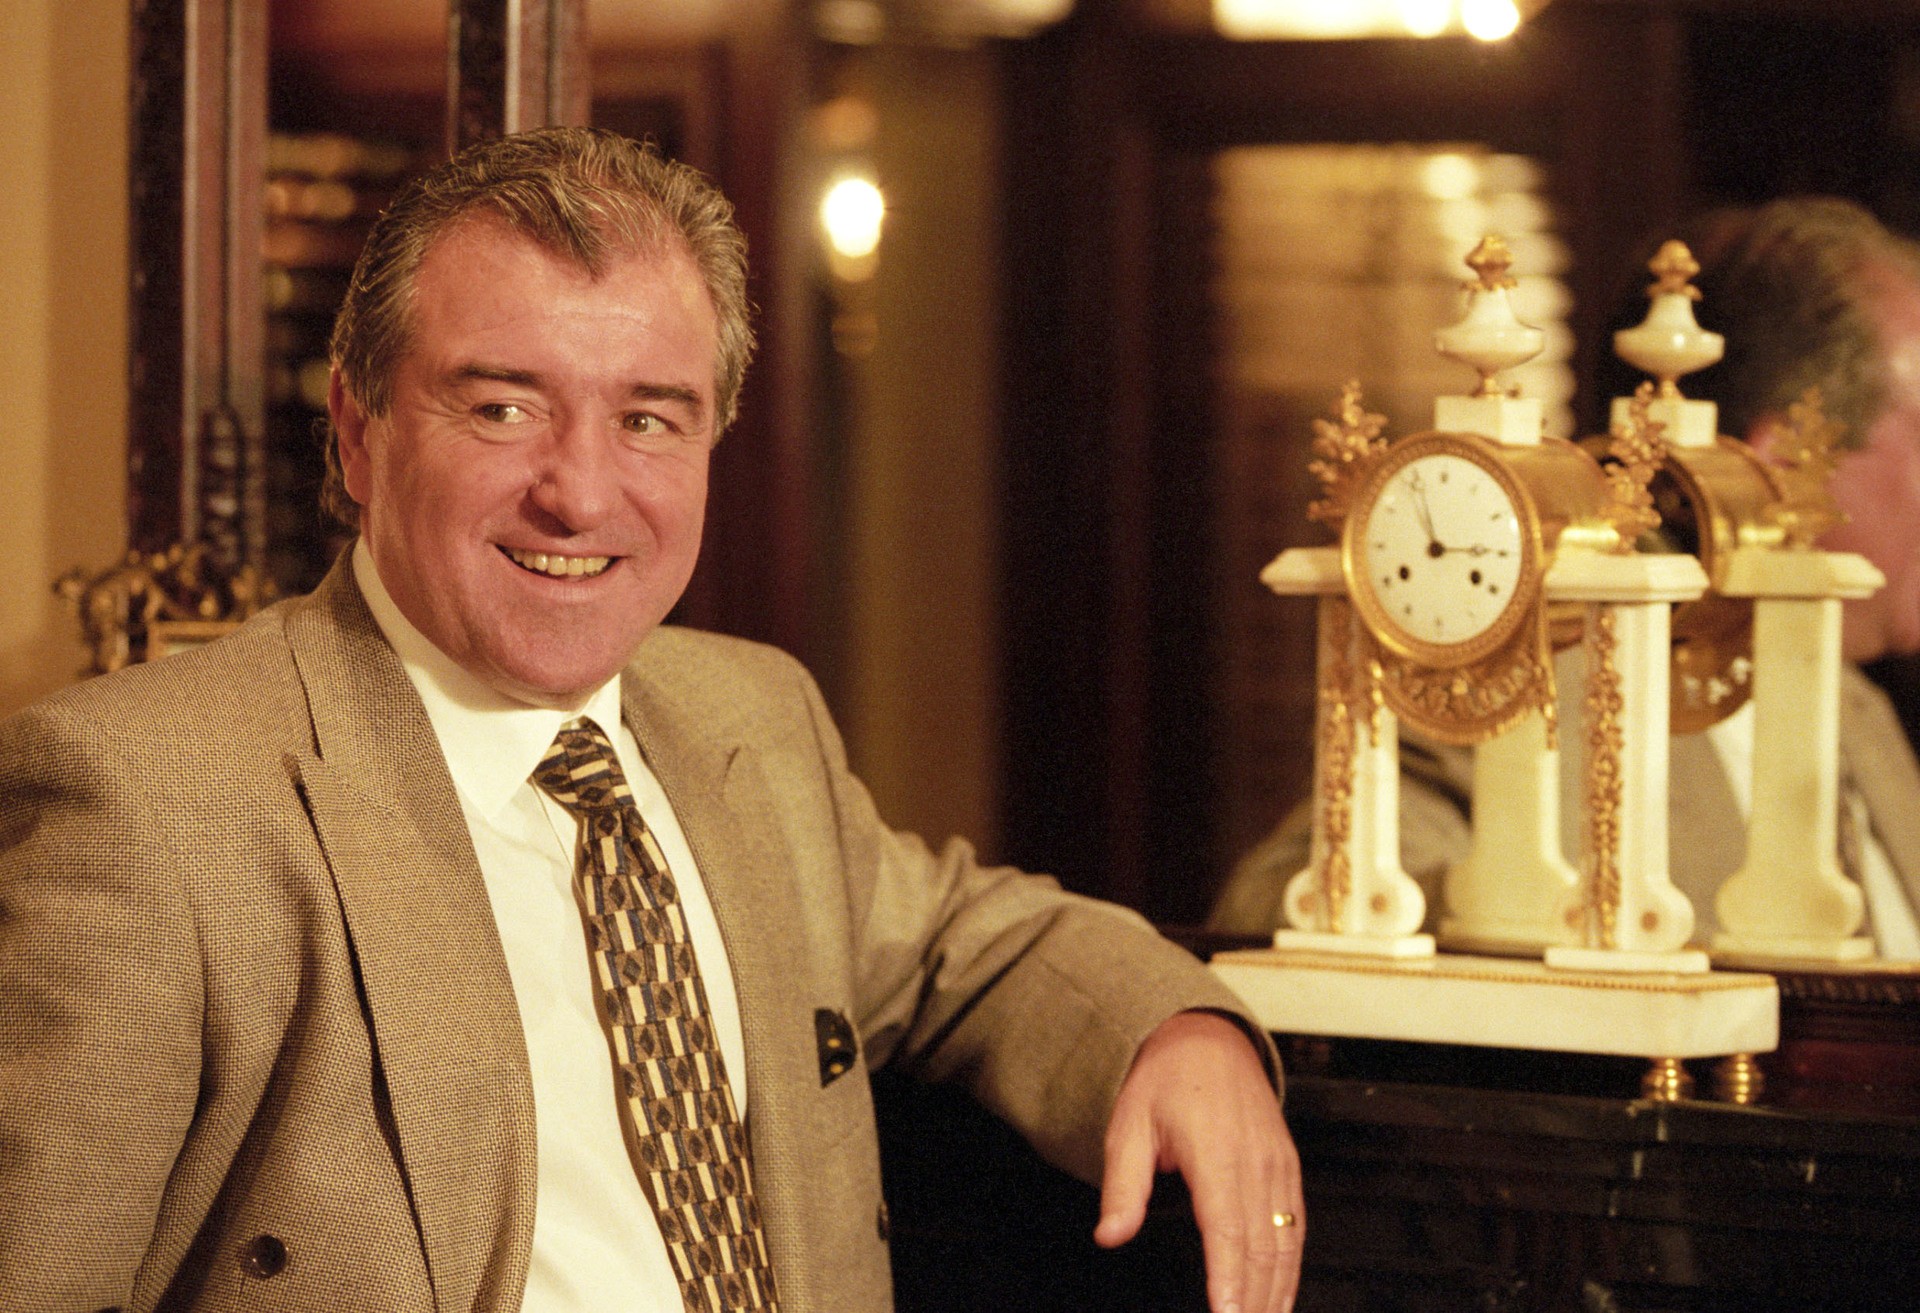 Scotland were drawn to face Terry Venables' England side (Photo by SNS Group)